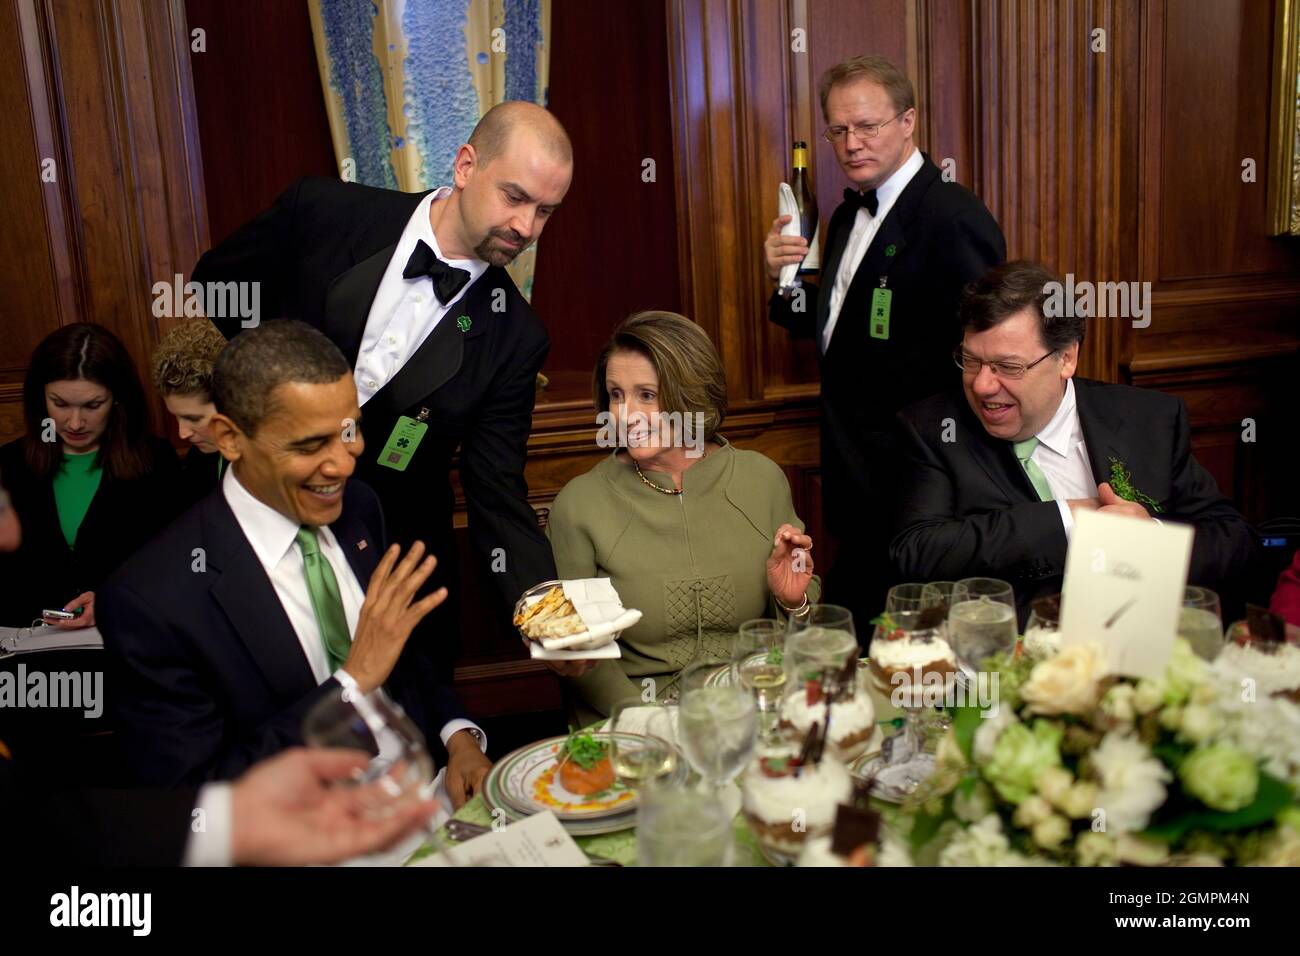 President Barack Obama and Prime Minister  Brian Cowen of Ireland attend a St. Patrick's Day lunch hosted by House Speaker Nancy Pelosi in the Rayburn Building, U.S. Capitol, Washington D.C. 3/17/09.Official White House Photo by Pete Souza Stock Photo